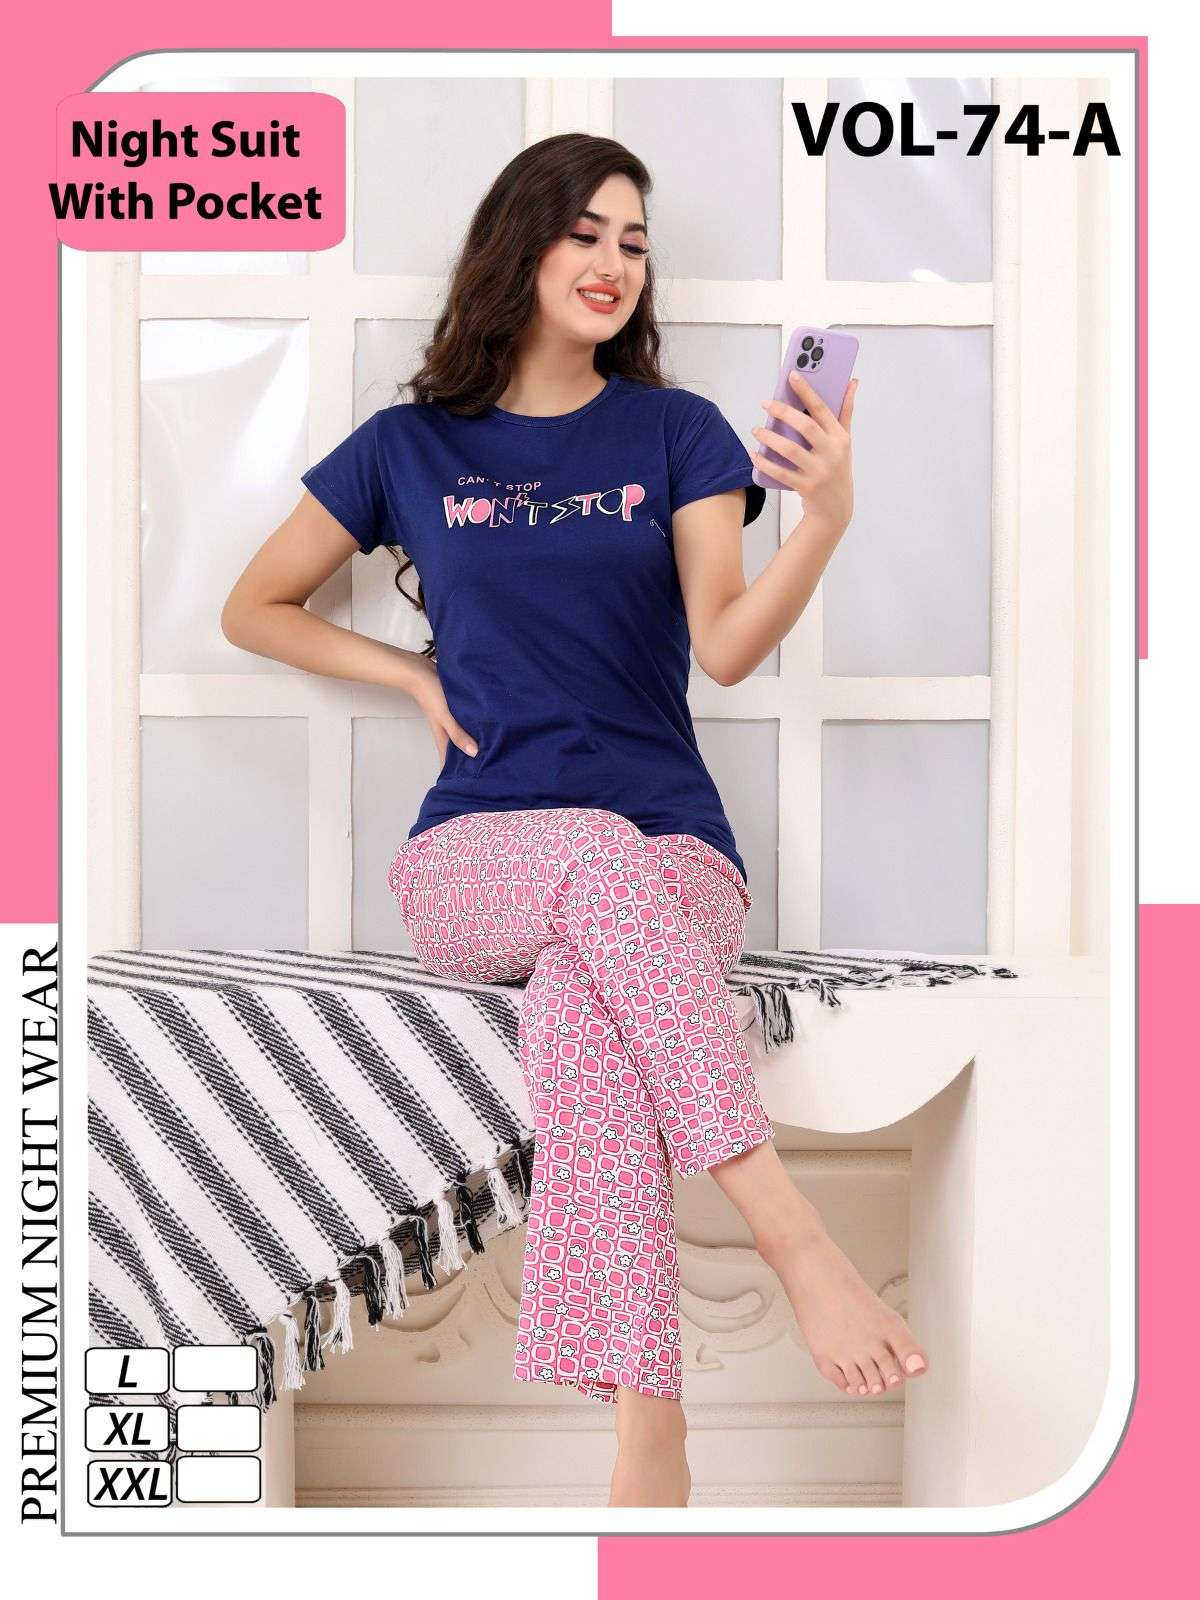 SUMMER SPECIAL VOL.74 A Heavy Shinker Hosiery Cotton Night Suits With Pocket CATALOG WHOLESALER BEST RATE